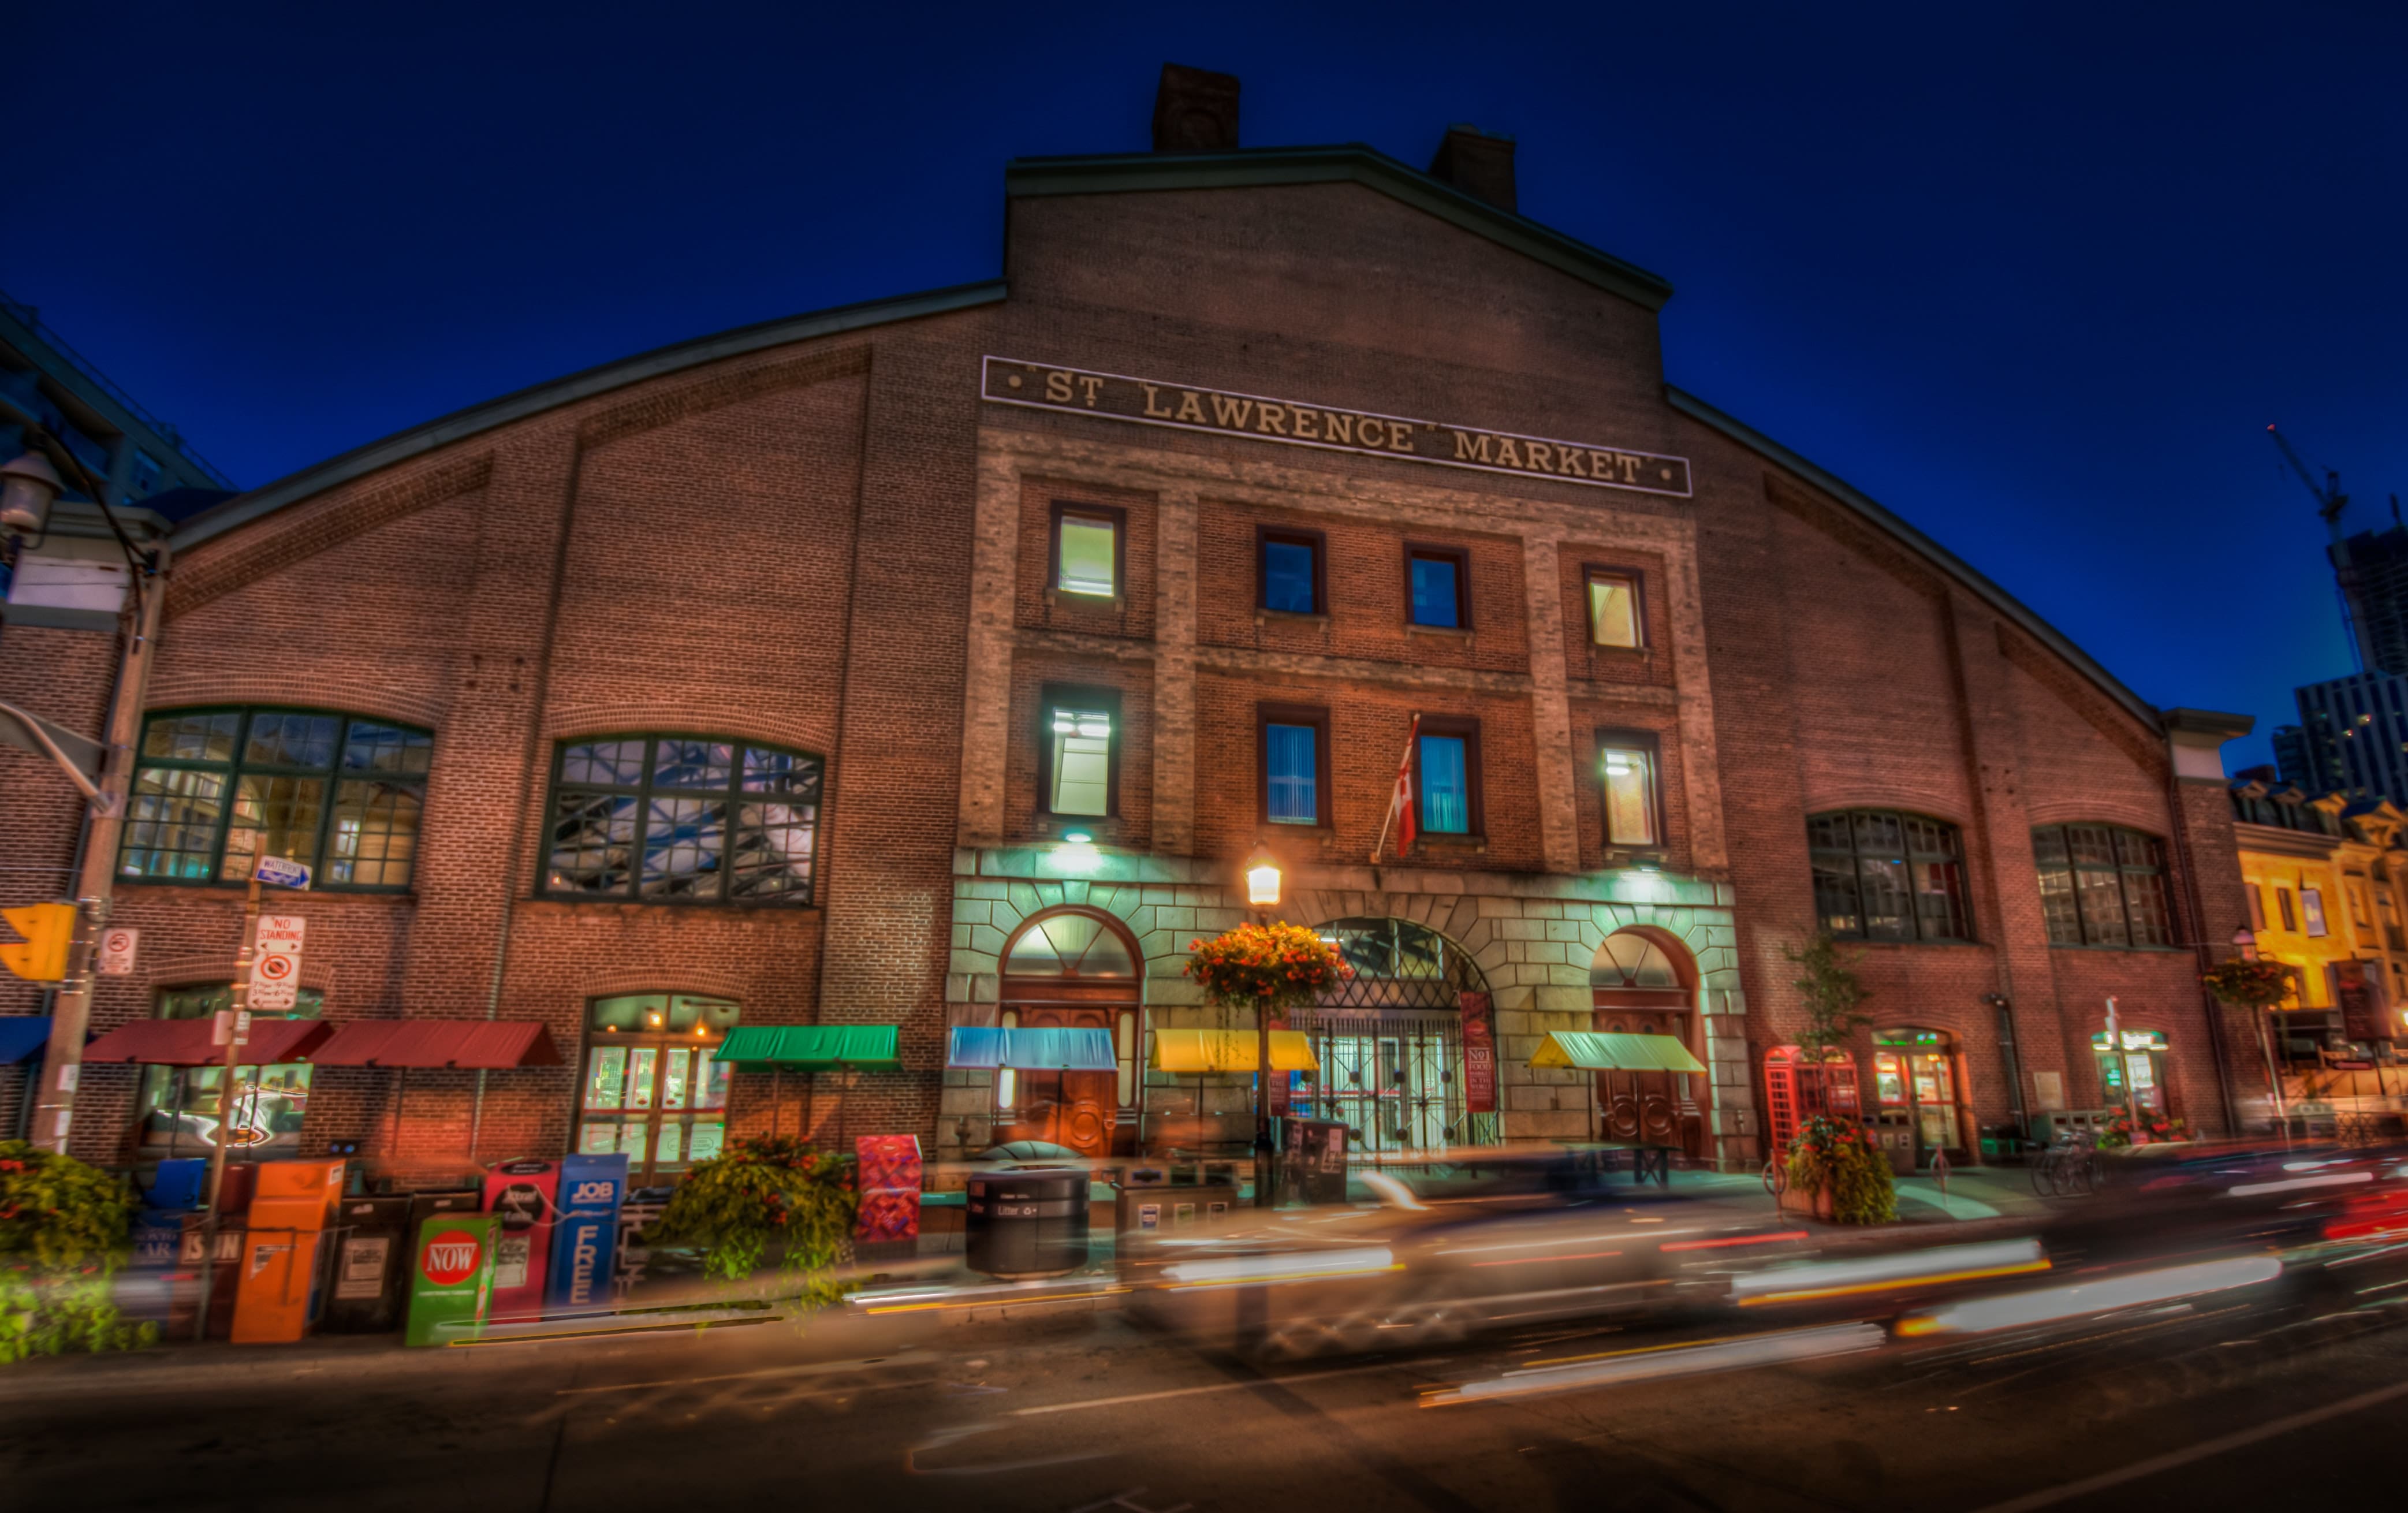 St. Lawrence Market building facade at night